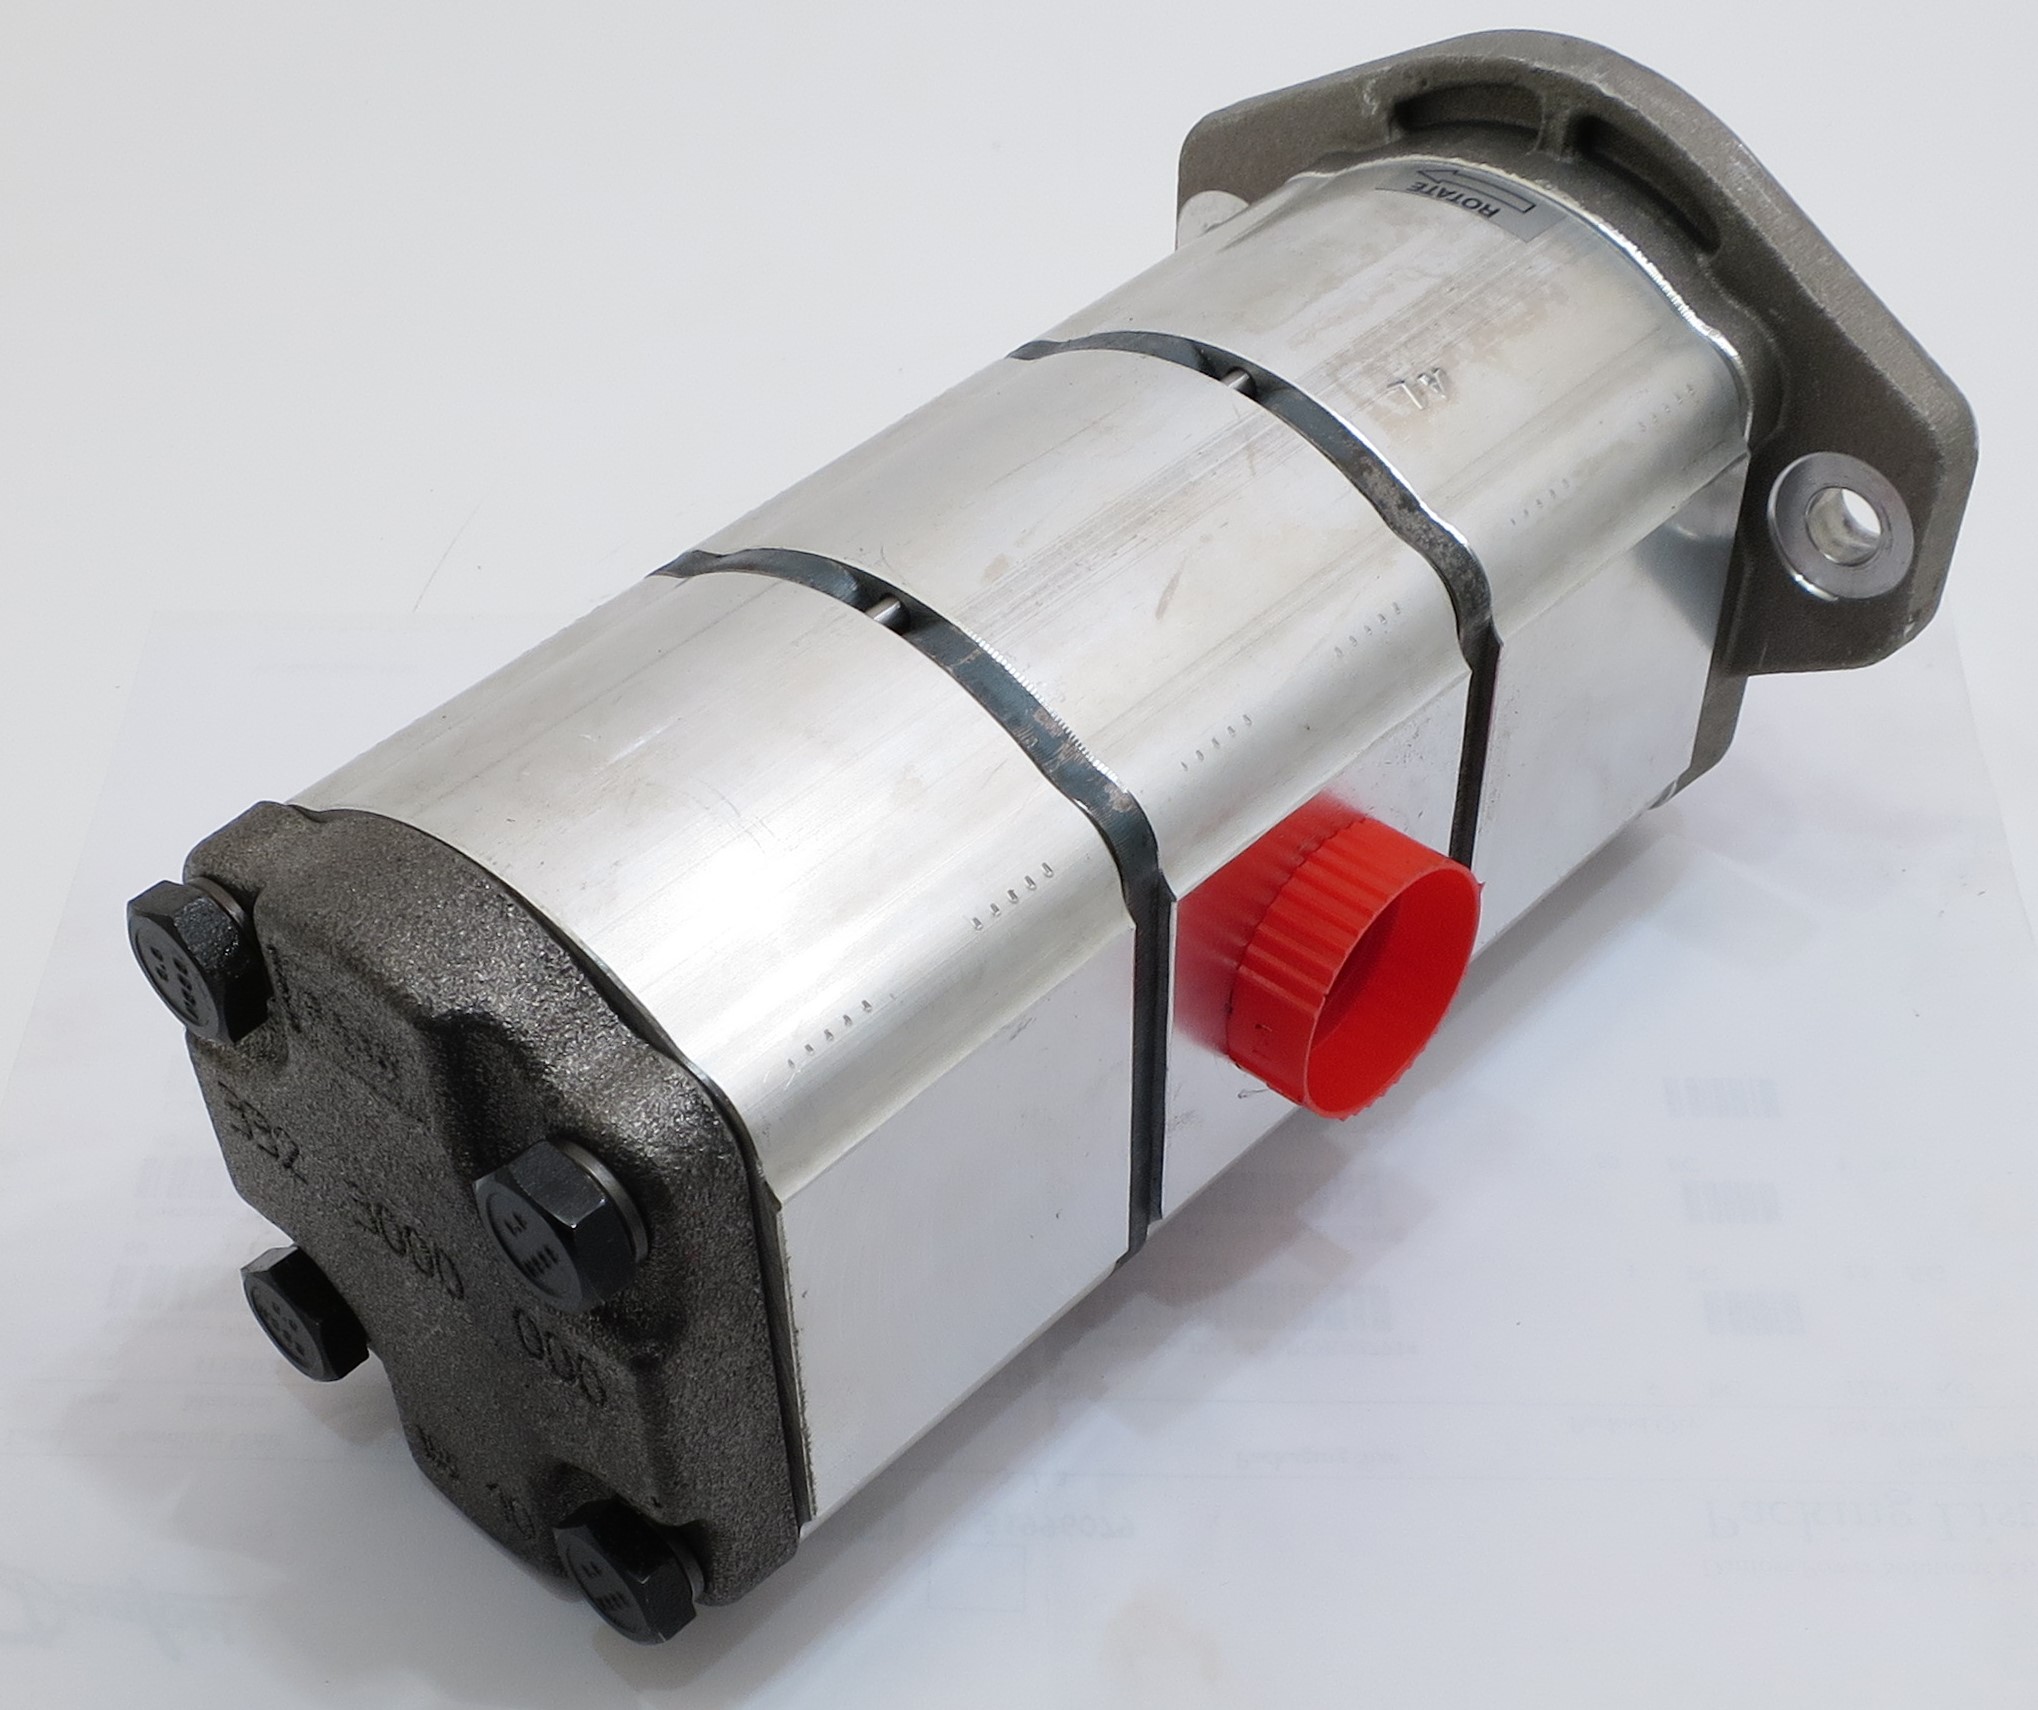 Hydraulic Gear Pumps - White House Products, Ltd